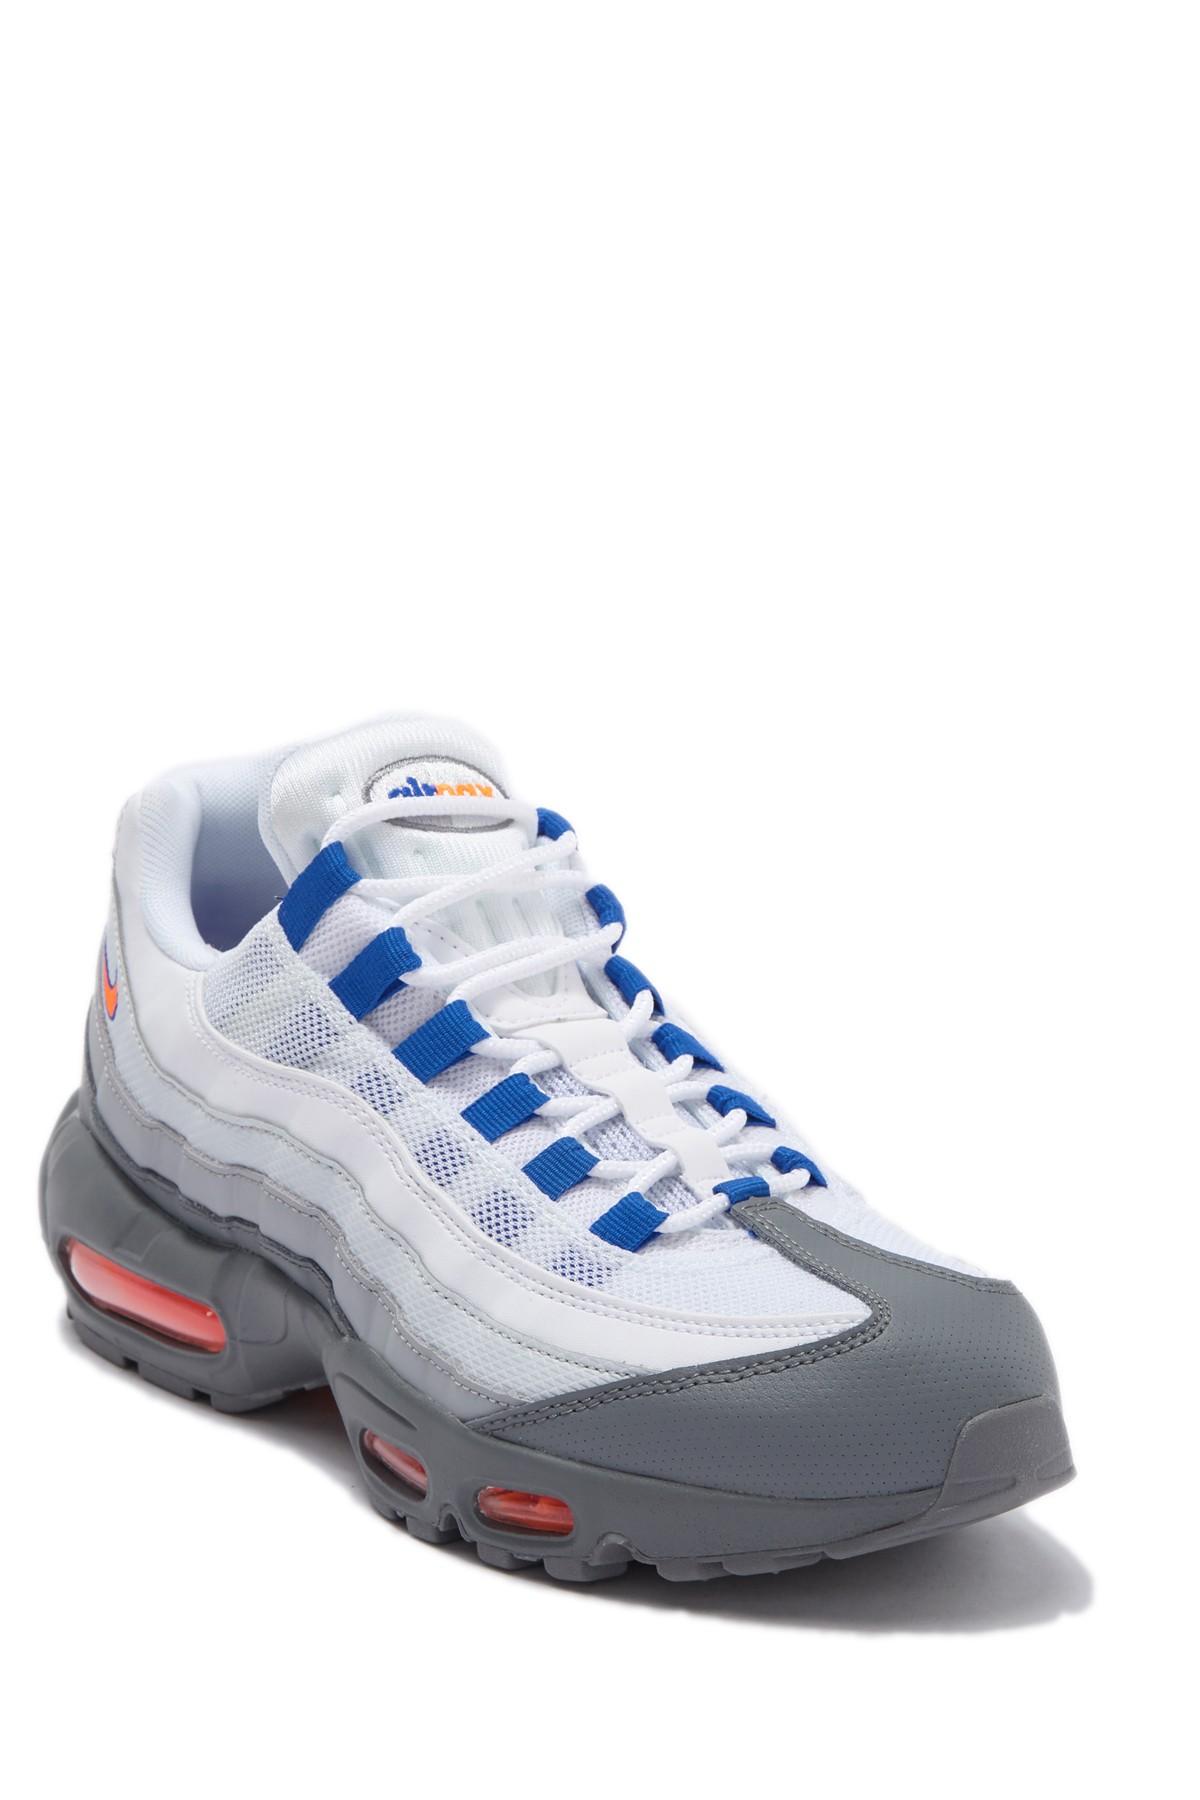 Nike Air Max 95 Essential 'ny Mets' Shoes - Size 9 for Men | Lyst